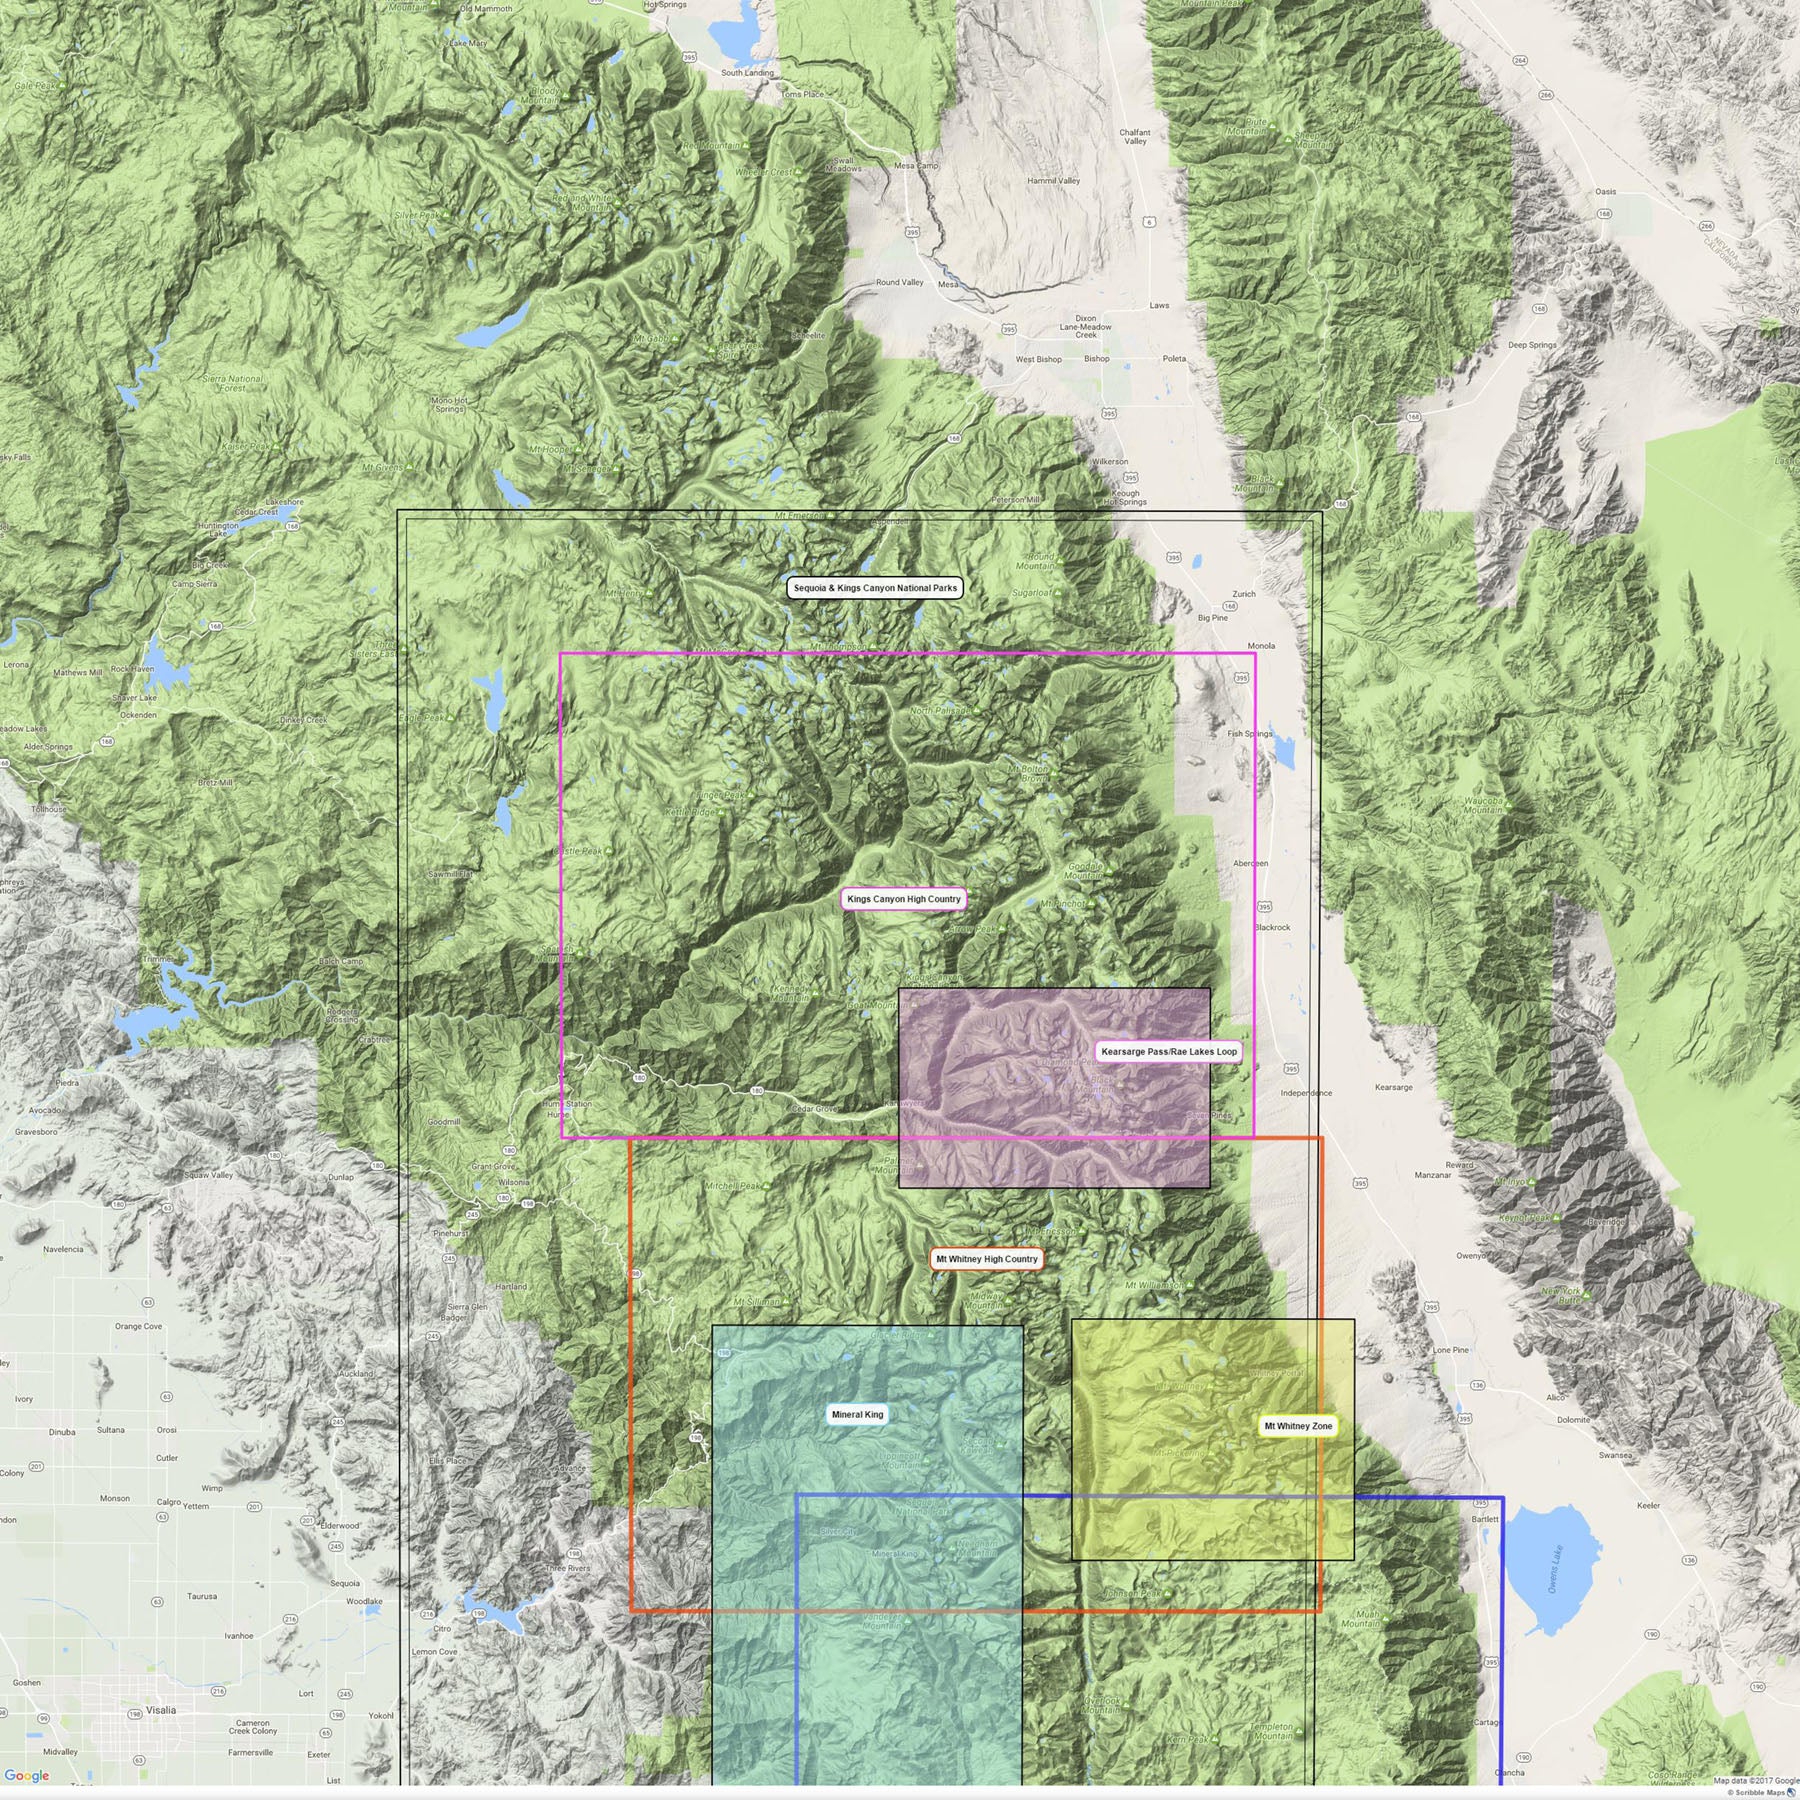 Kings Canyon overview map showing adjacent titles